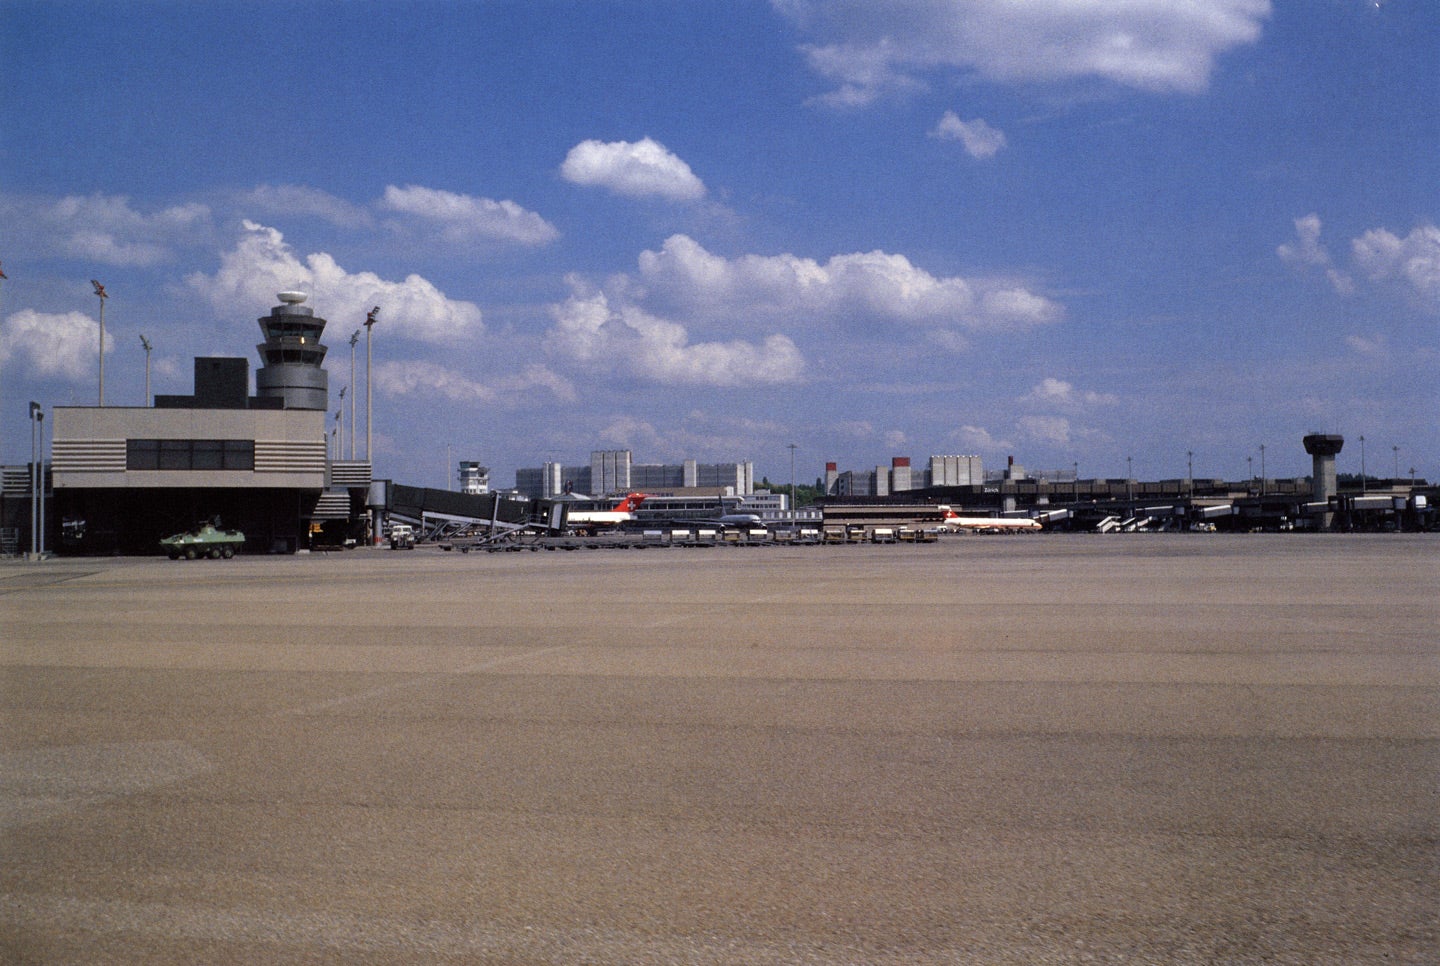 Peter Fischli and David Weiss: Airports